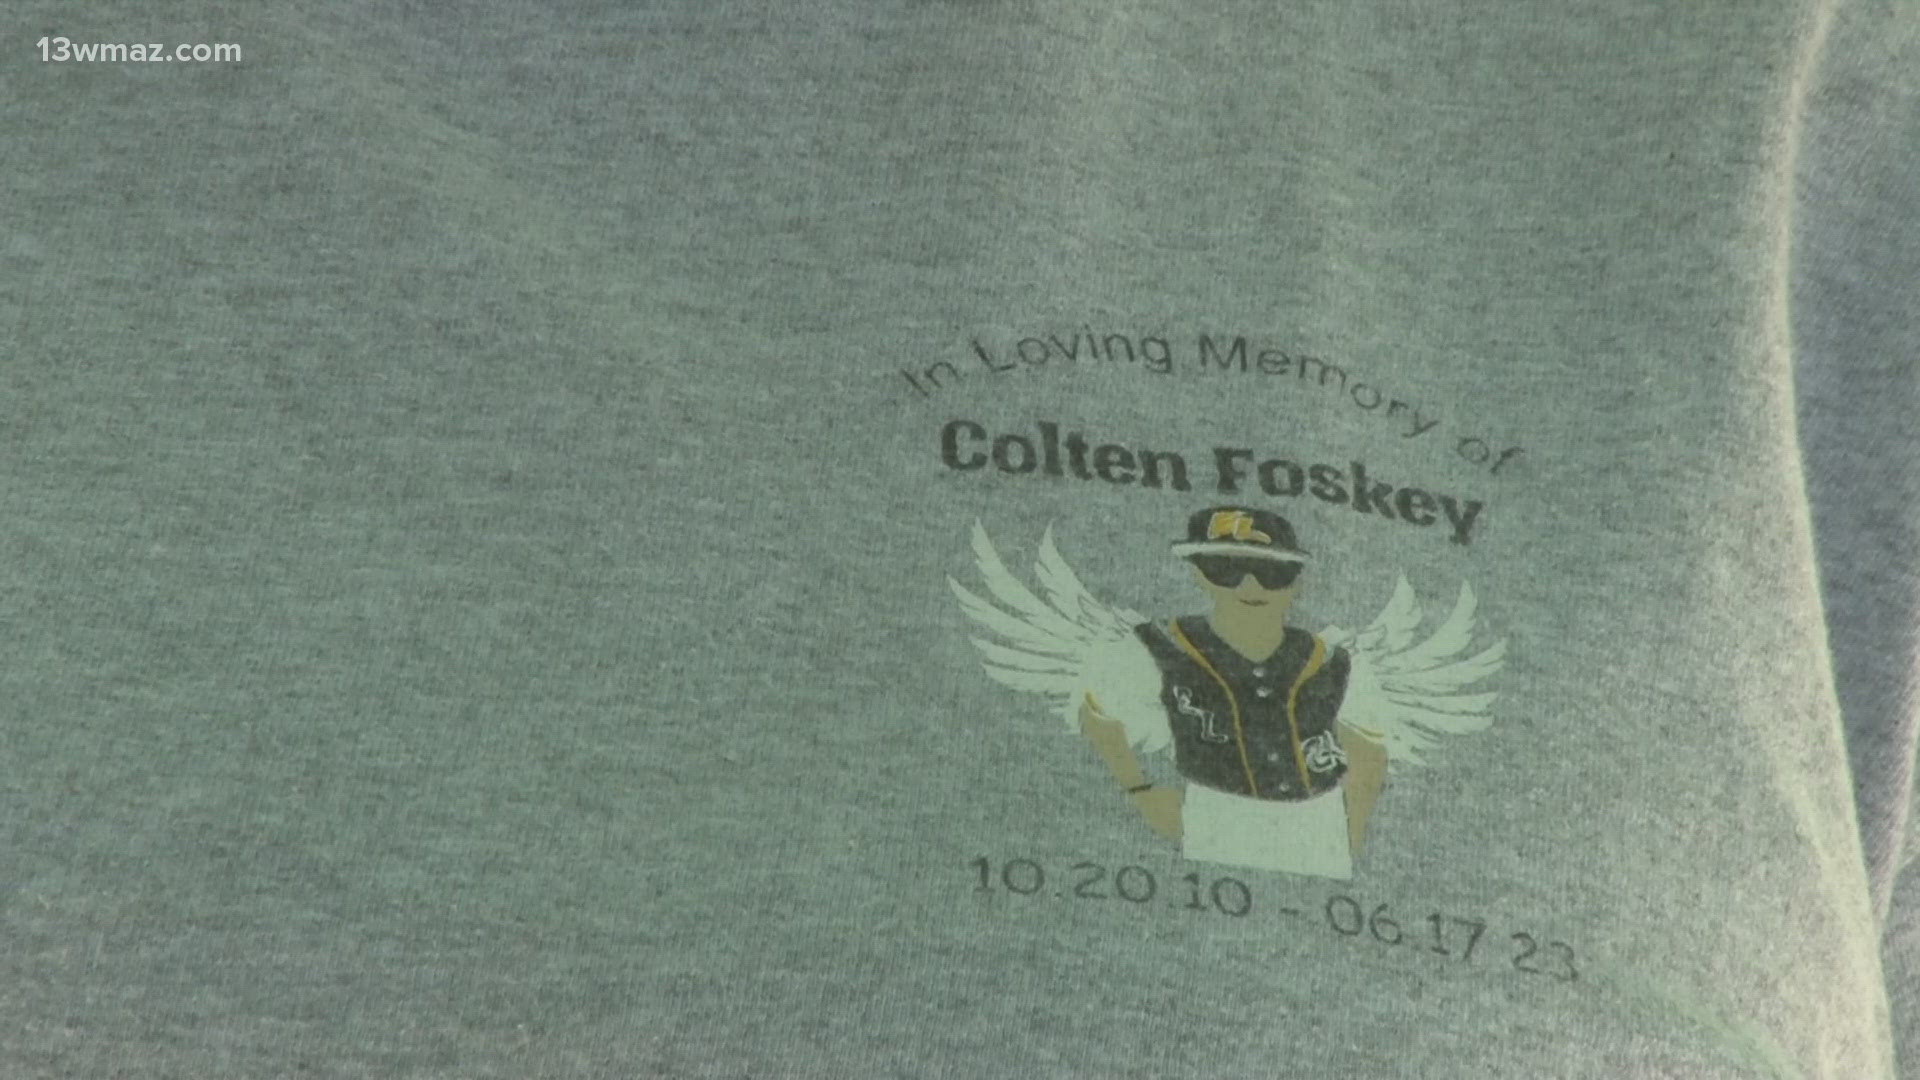 Foskey died last year in a boating accident over Father's Day weekend. This weekend's tournament proceeds will go to a scholarship dedicated in his honor.